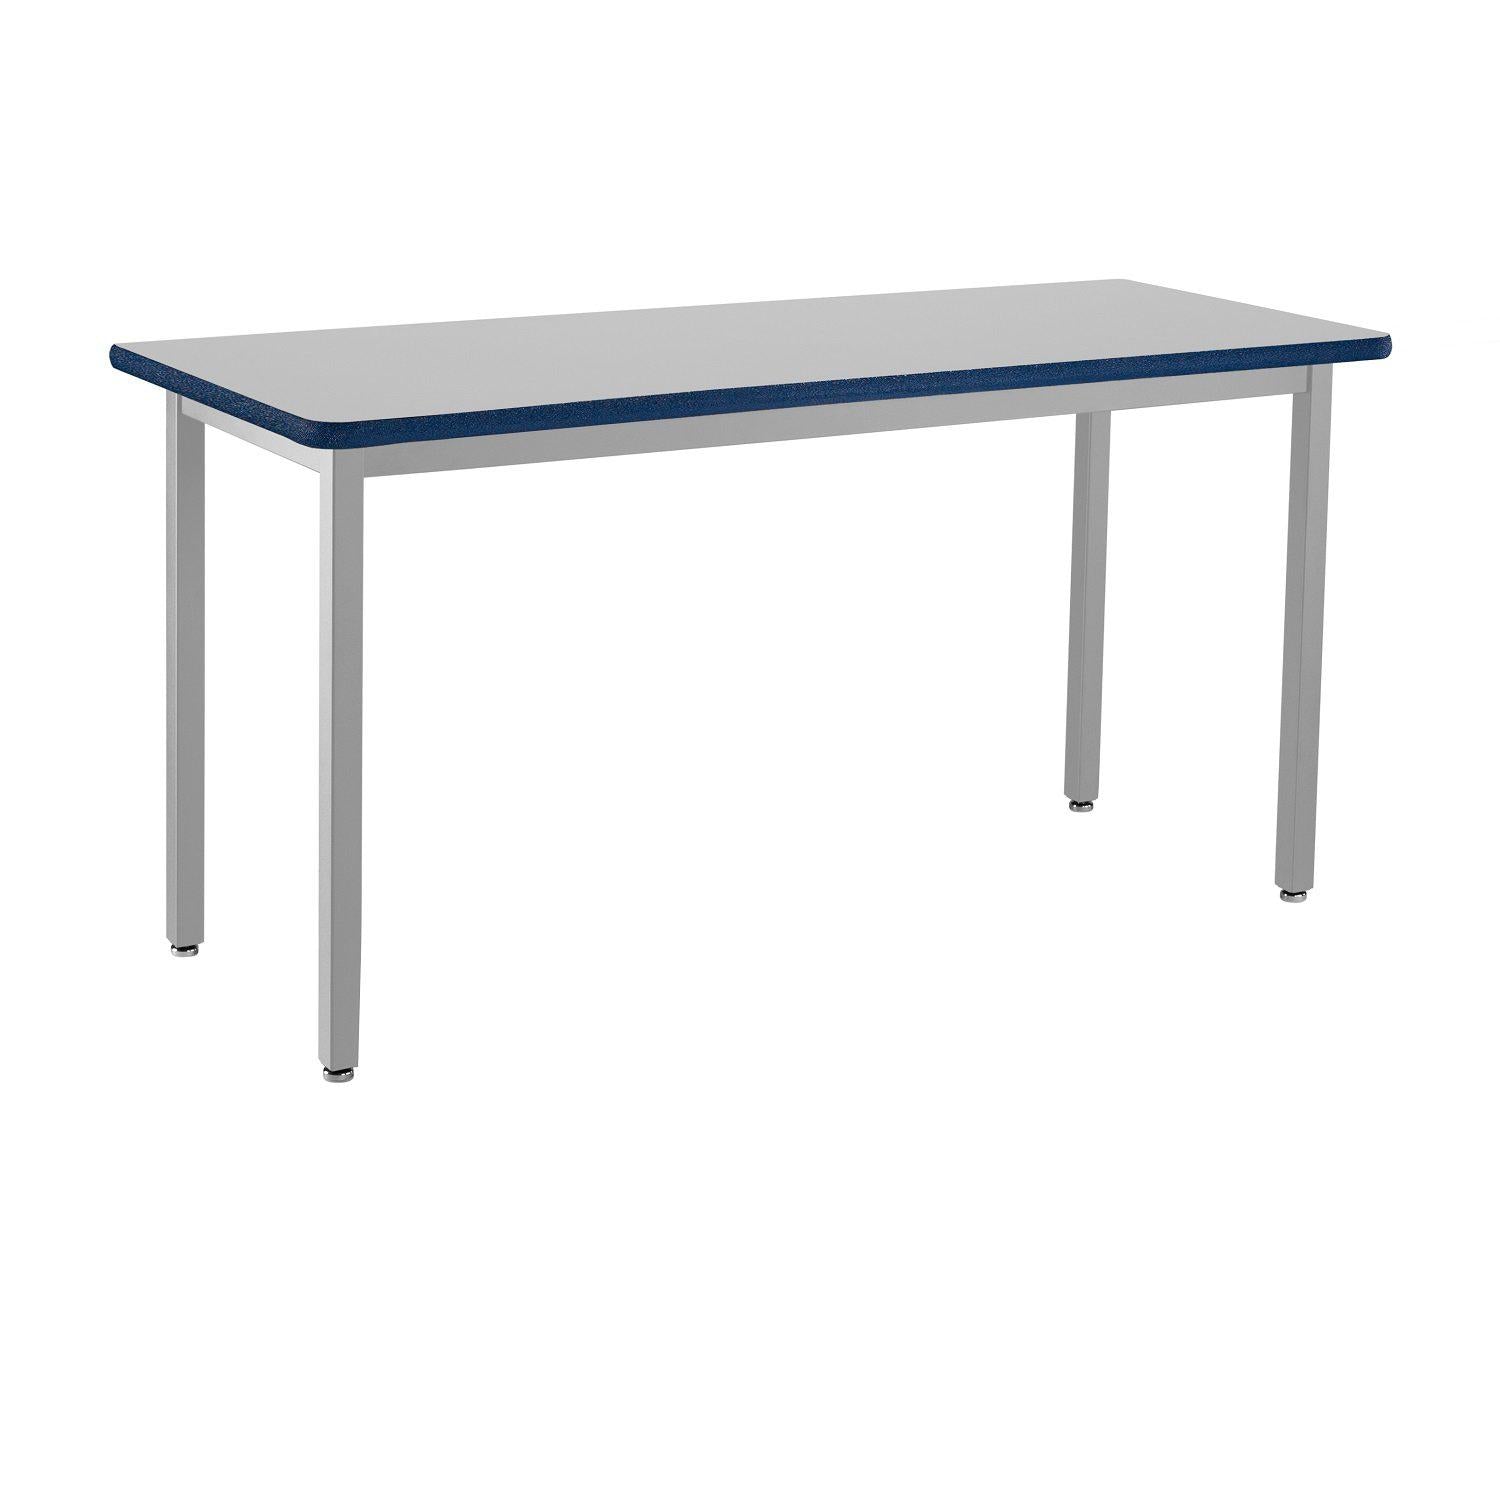 Heavy-Duty Fixed Height Utility Table, Soft Grey Frame, 24" x 54", Supreme High-Pressure Laminate Top with Black ProtectEdge